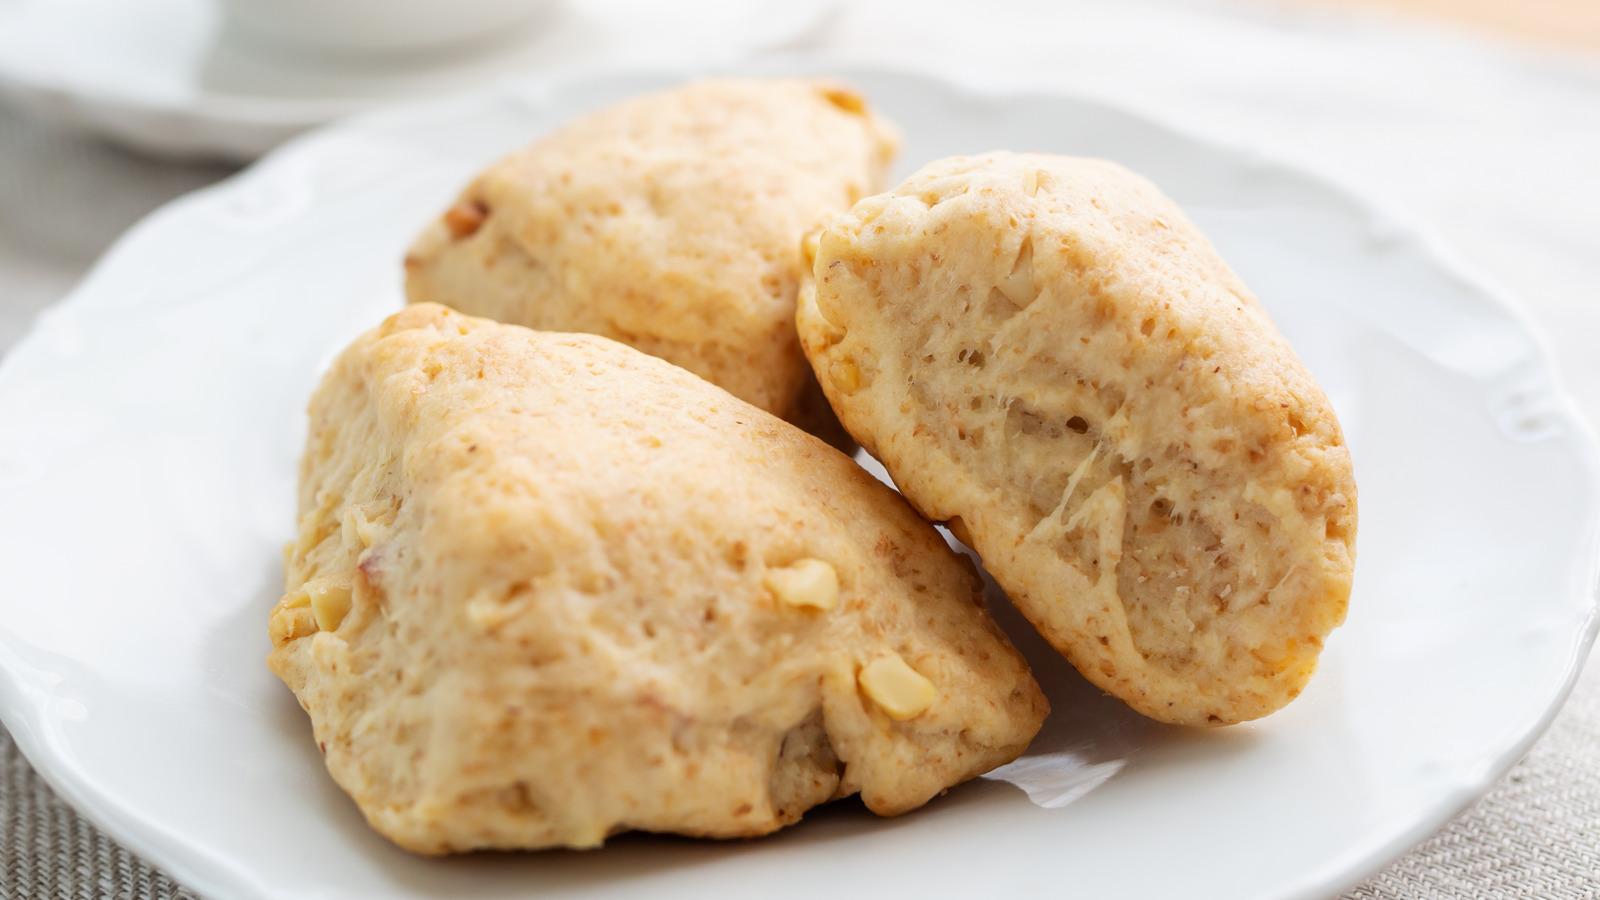 https://www.thedailymeal.com/img/gallery/for-restaurant-quality-scones-make-sure-to-use-cold-butter/l-intro-1681765089.jpg